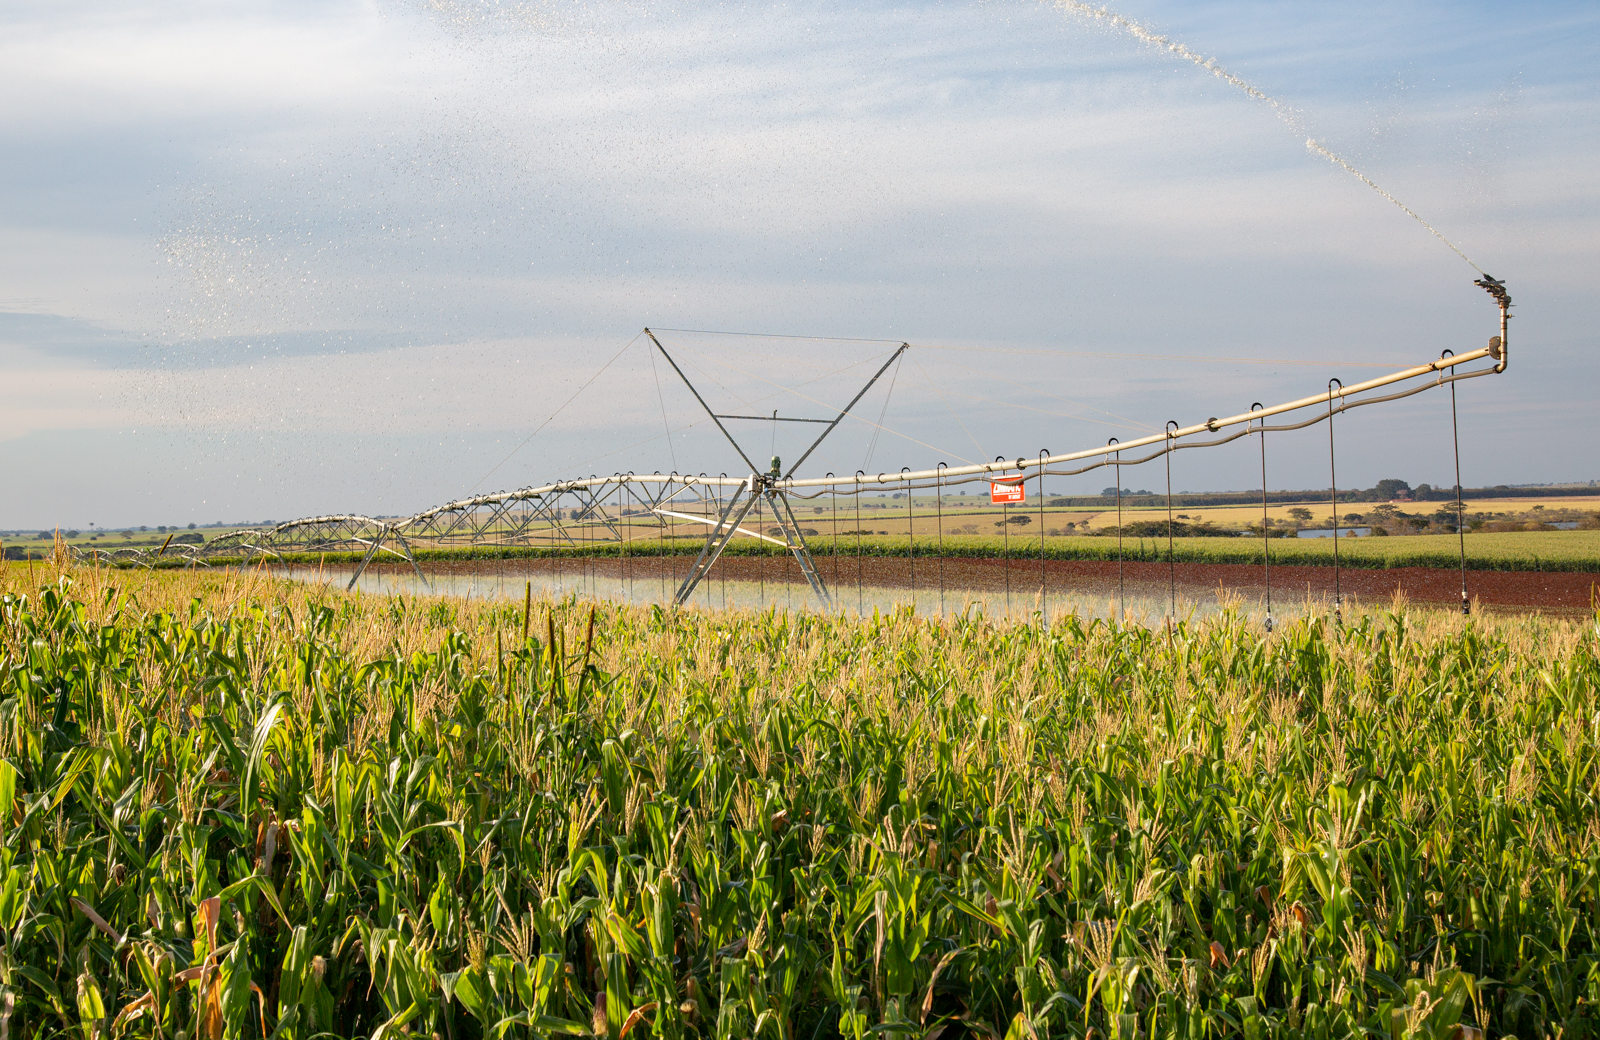 Center pivot irrigation or drip irrigation: what’s the difference and which method should you use?